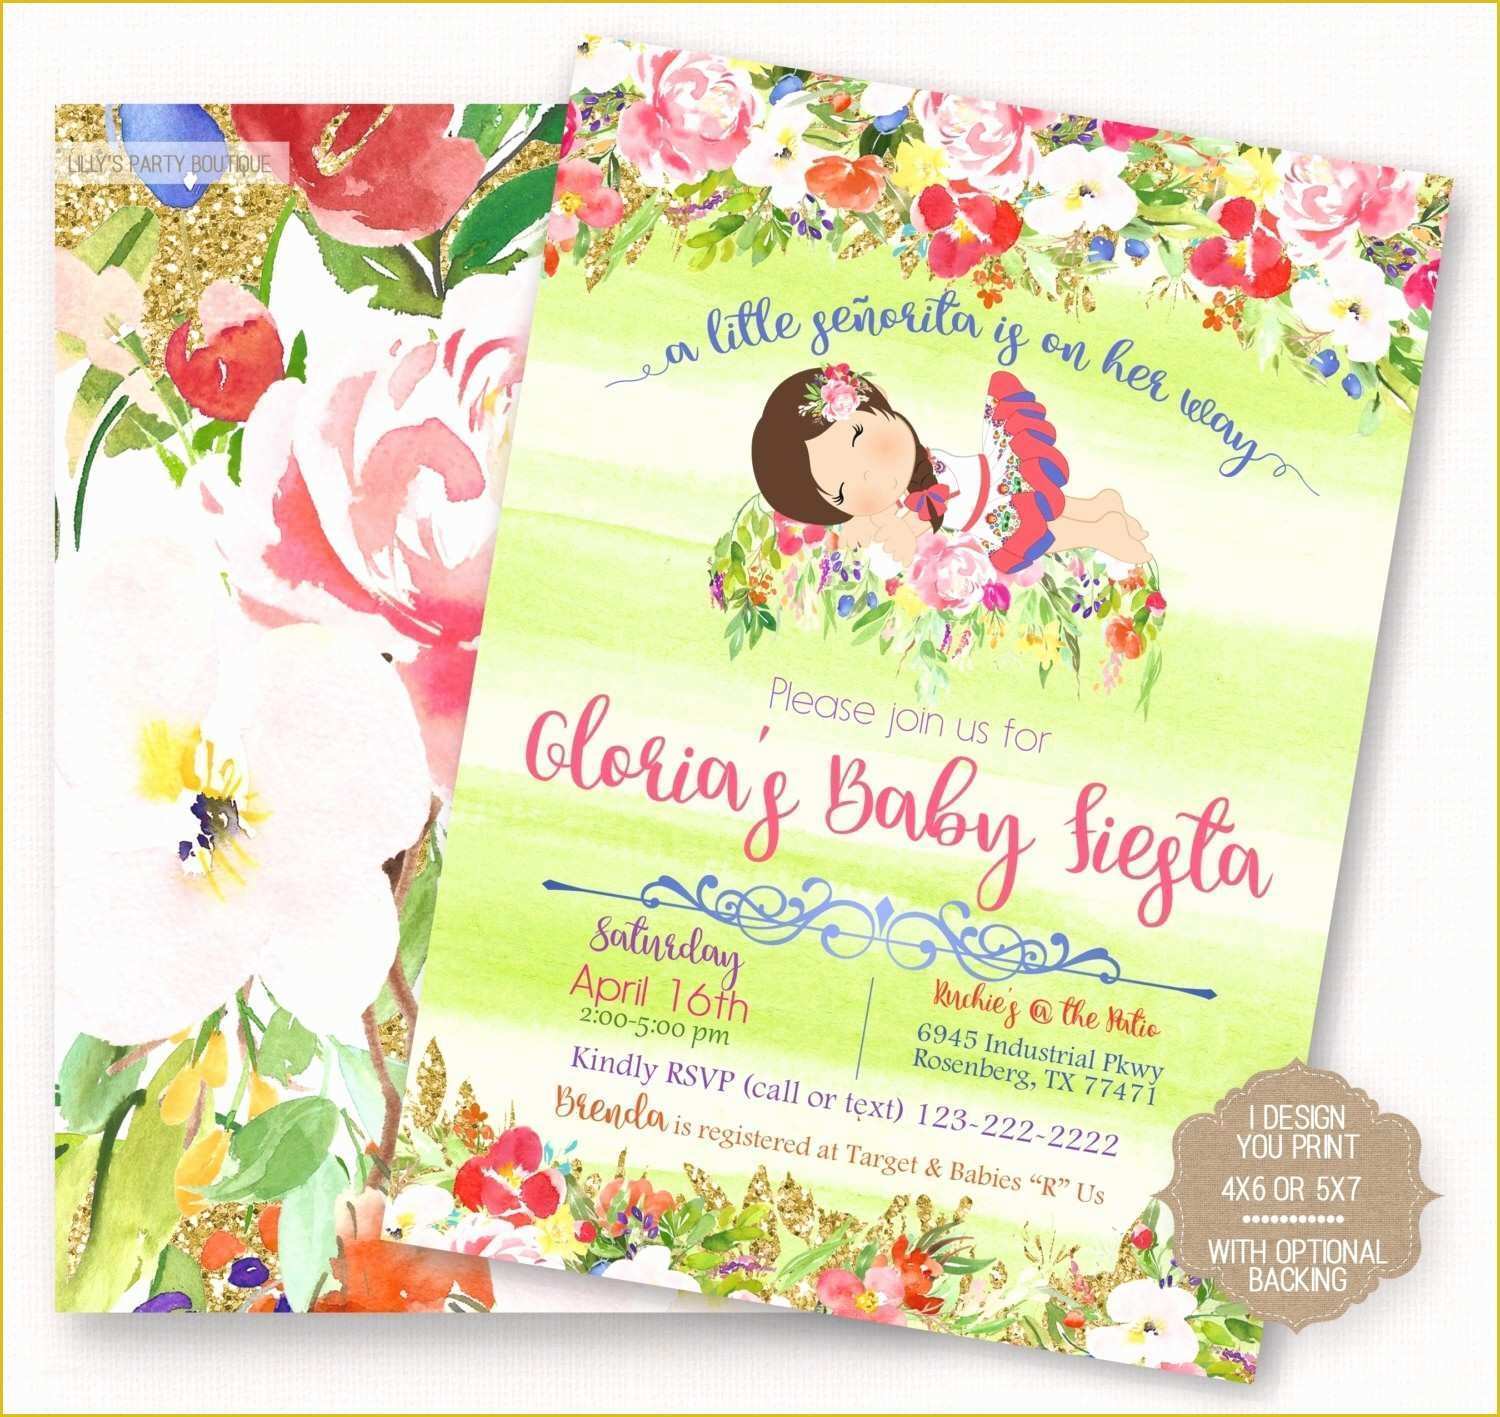 Fiesta Invitations Templates Free Of Lovely Free Printable Mexican Fiesta Invitation Templates